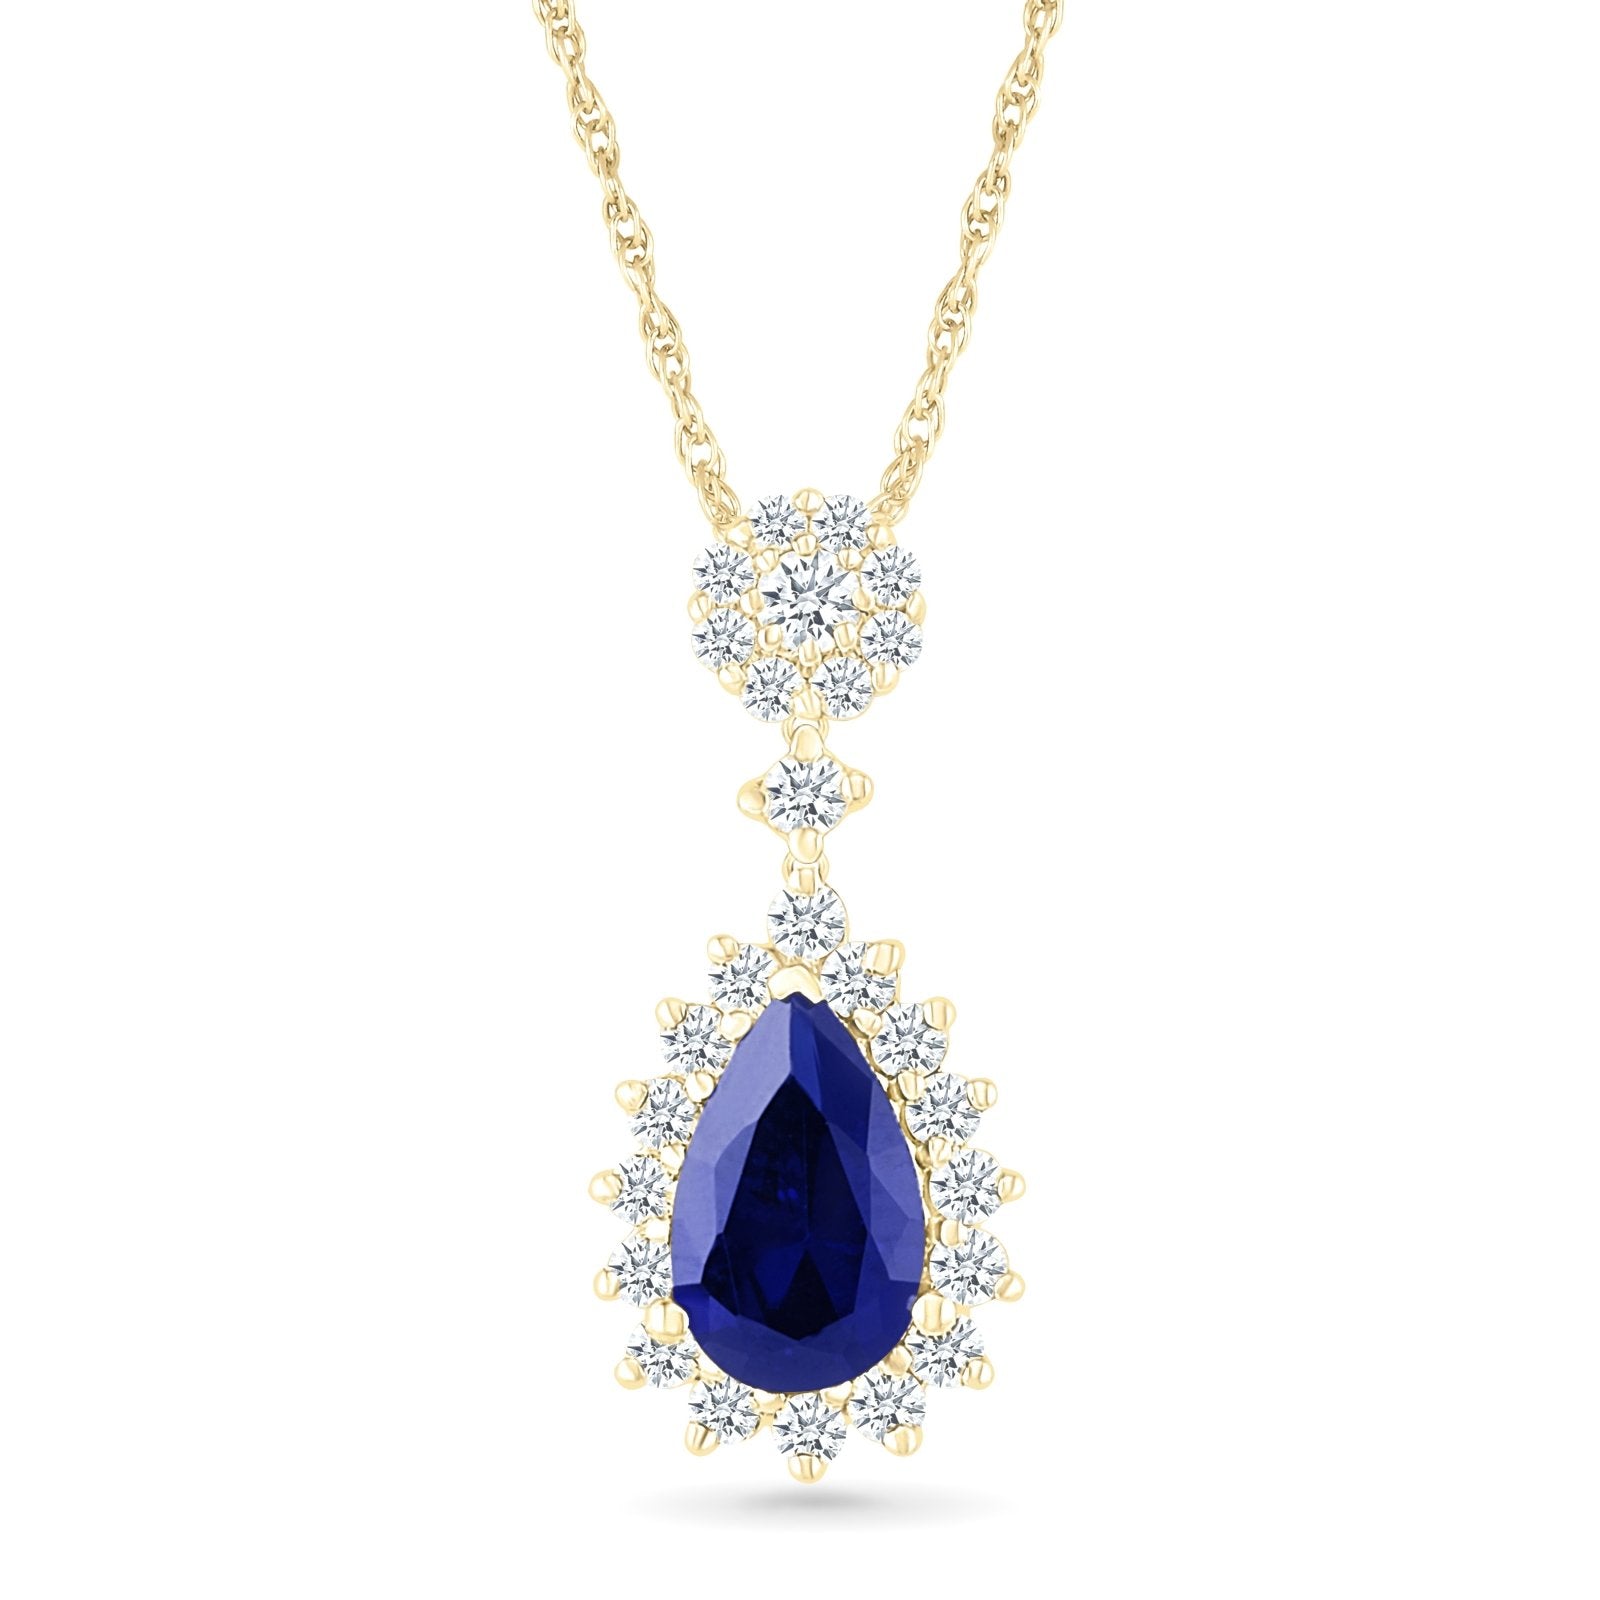 Teardrop Shaped Sapphire with White Sapphire Halo Necklaces Estella Collection 32721 10k 925 Birthstone #tag4# #tag5# #tag6# #tag7# #tag8# #tag9# #tag10#